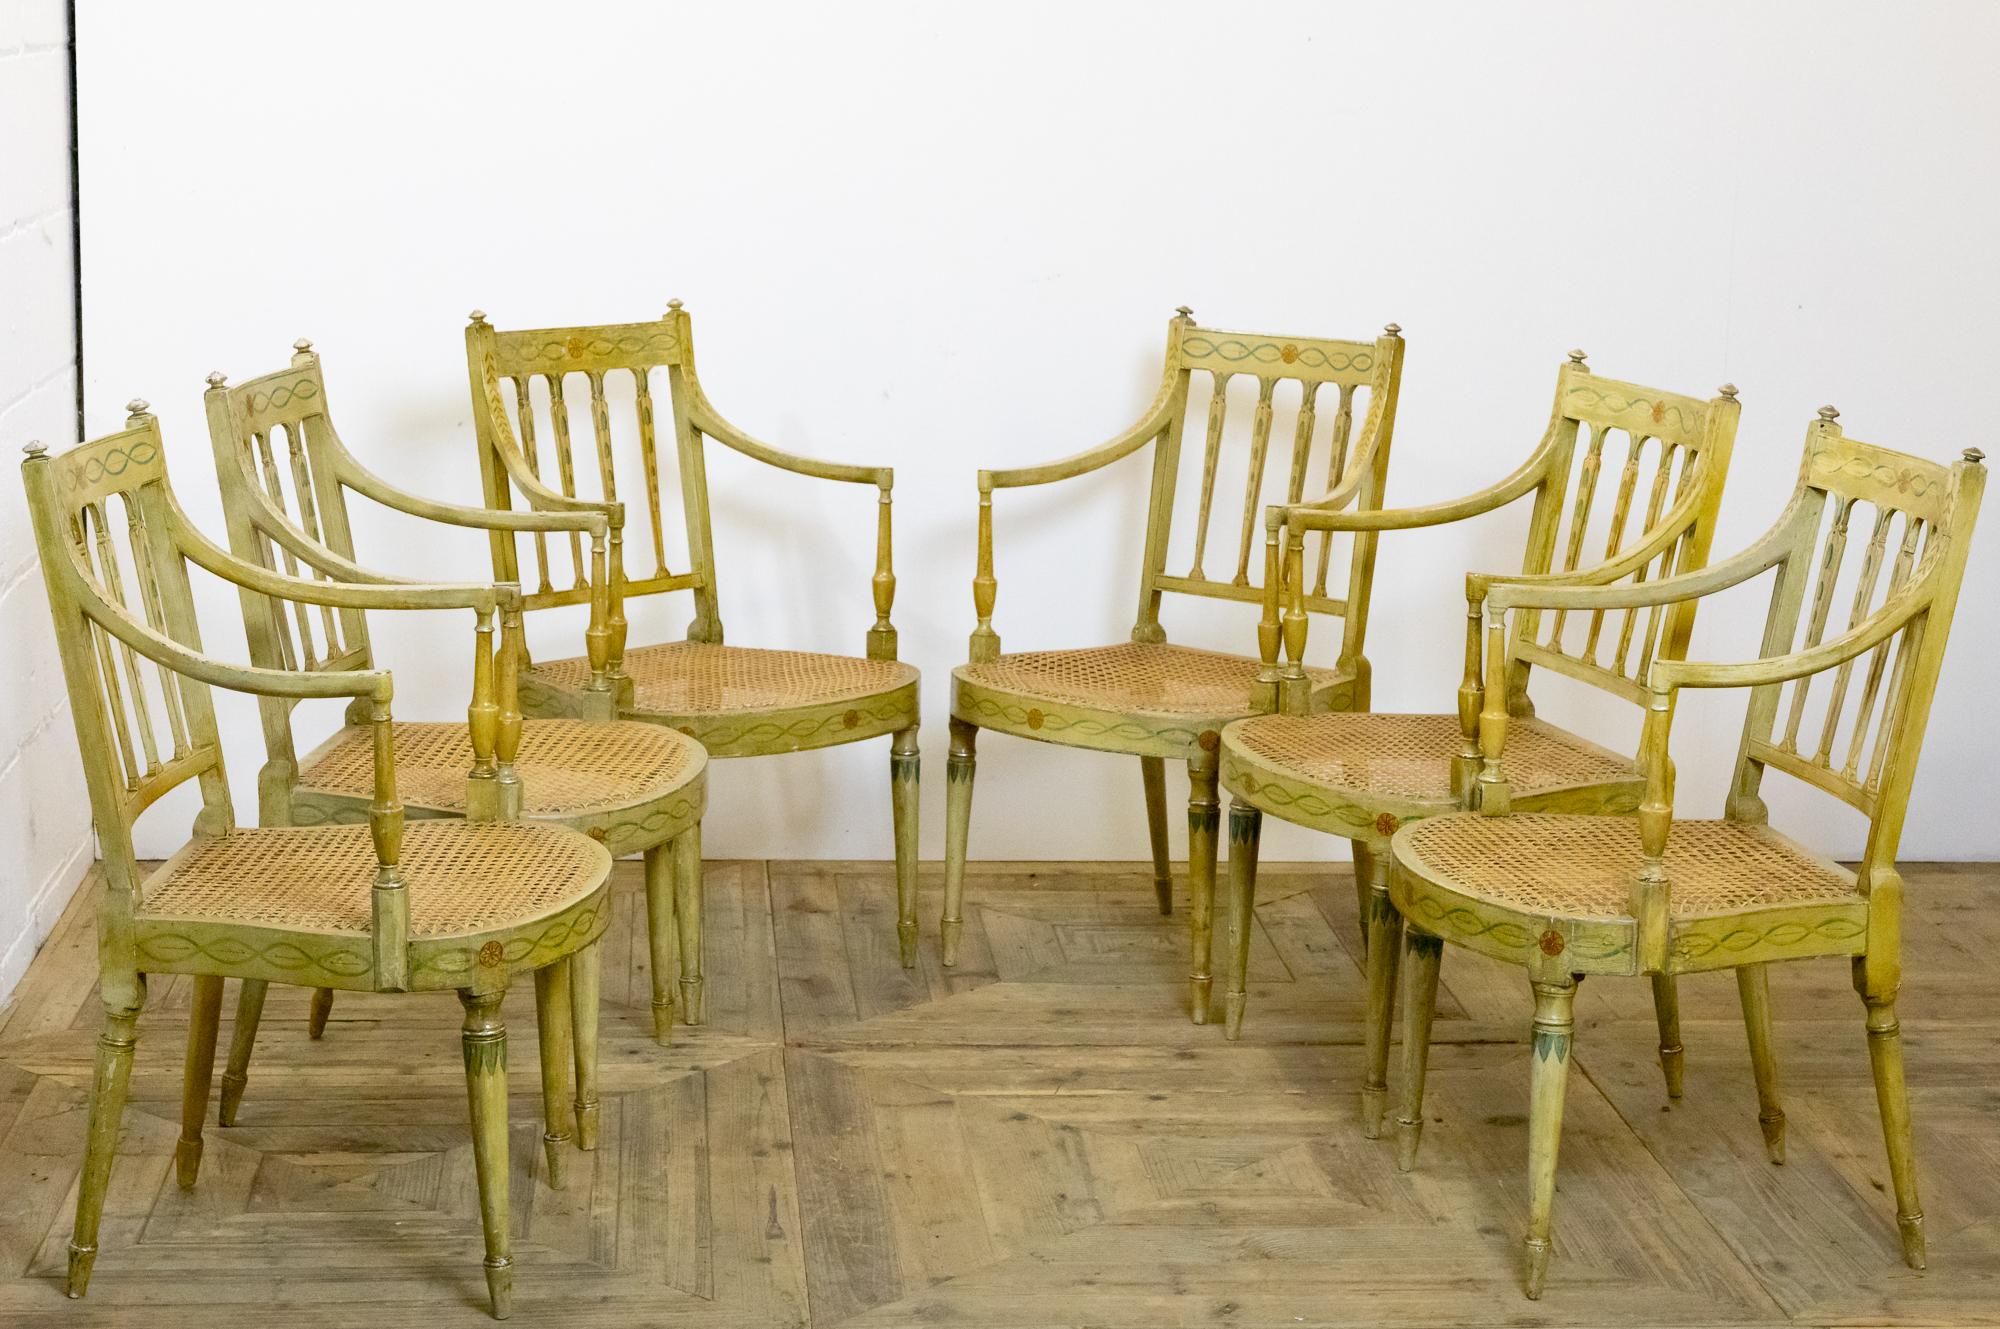 A truly stunning set of six painted armchairs, dating to the early 20th century. In the George III style with caned seats. All in their original paint and retaining much of their decoration aged with a lovely patina and mellow color.